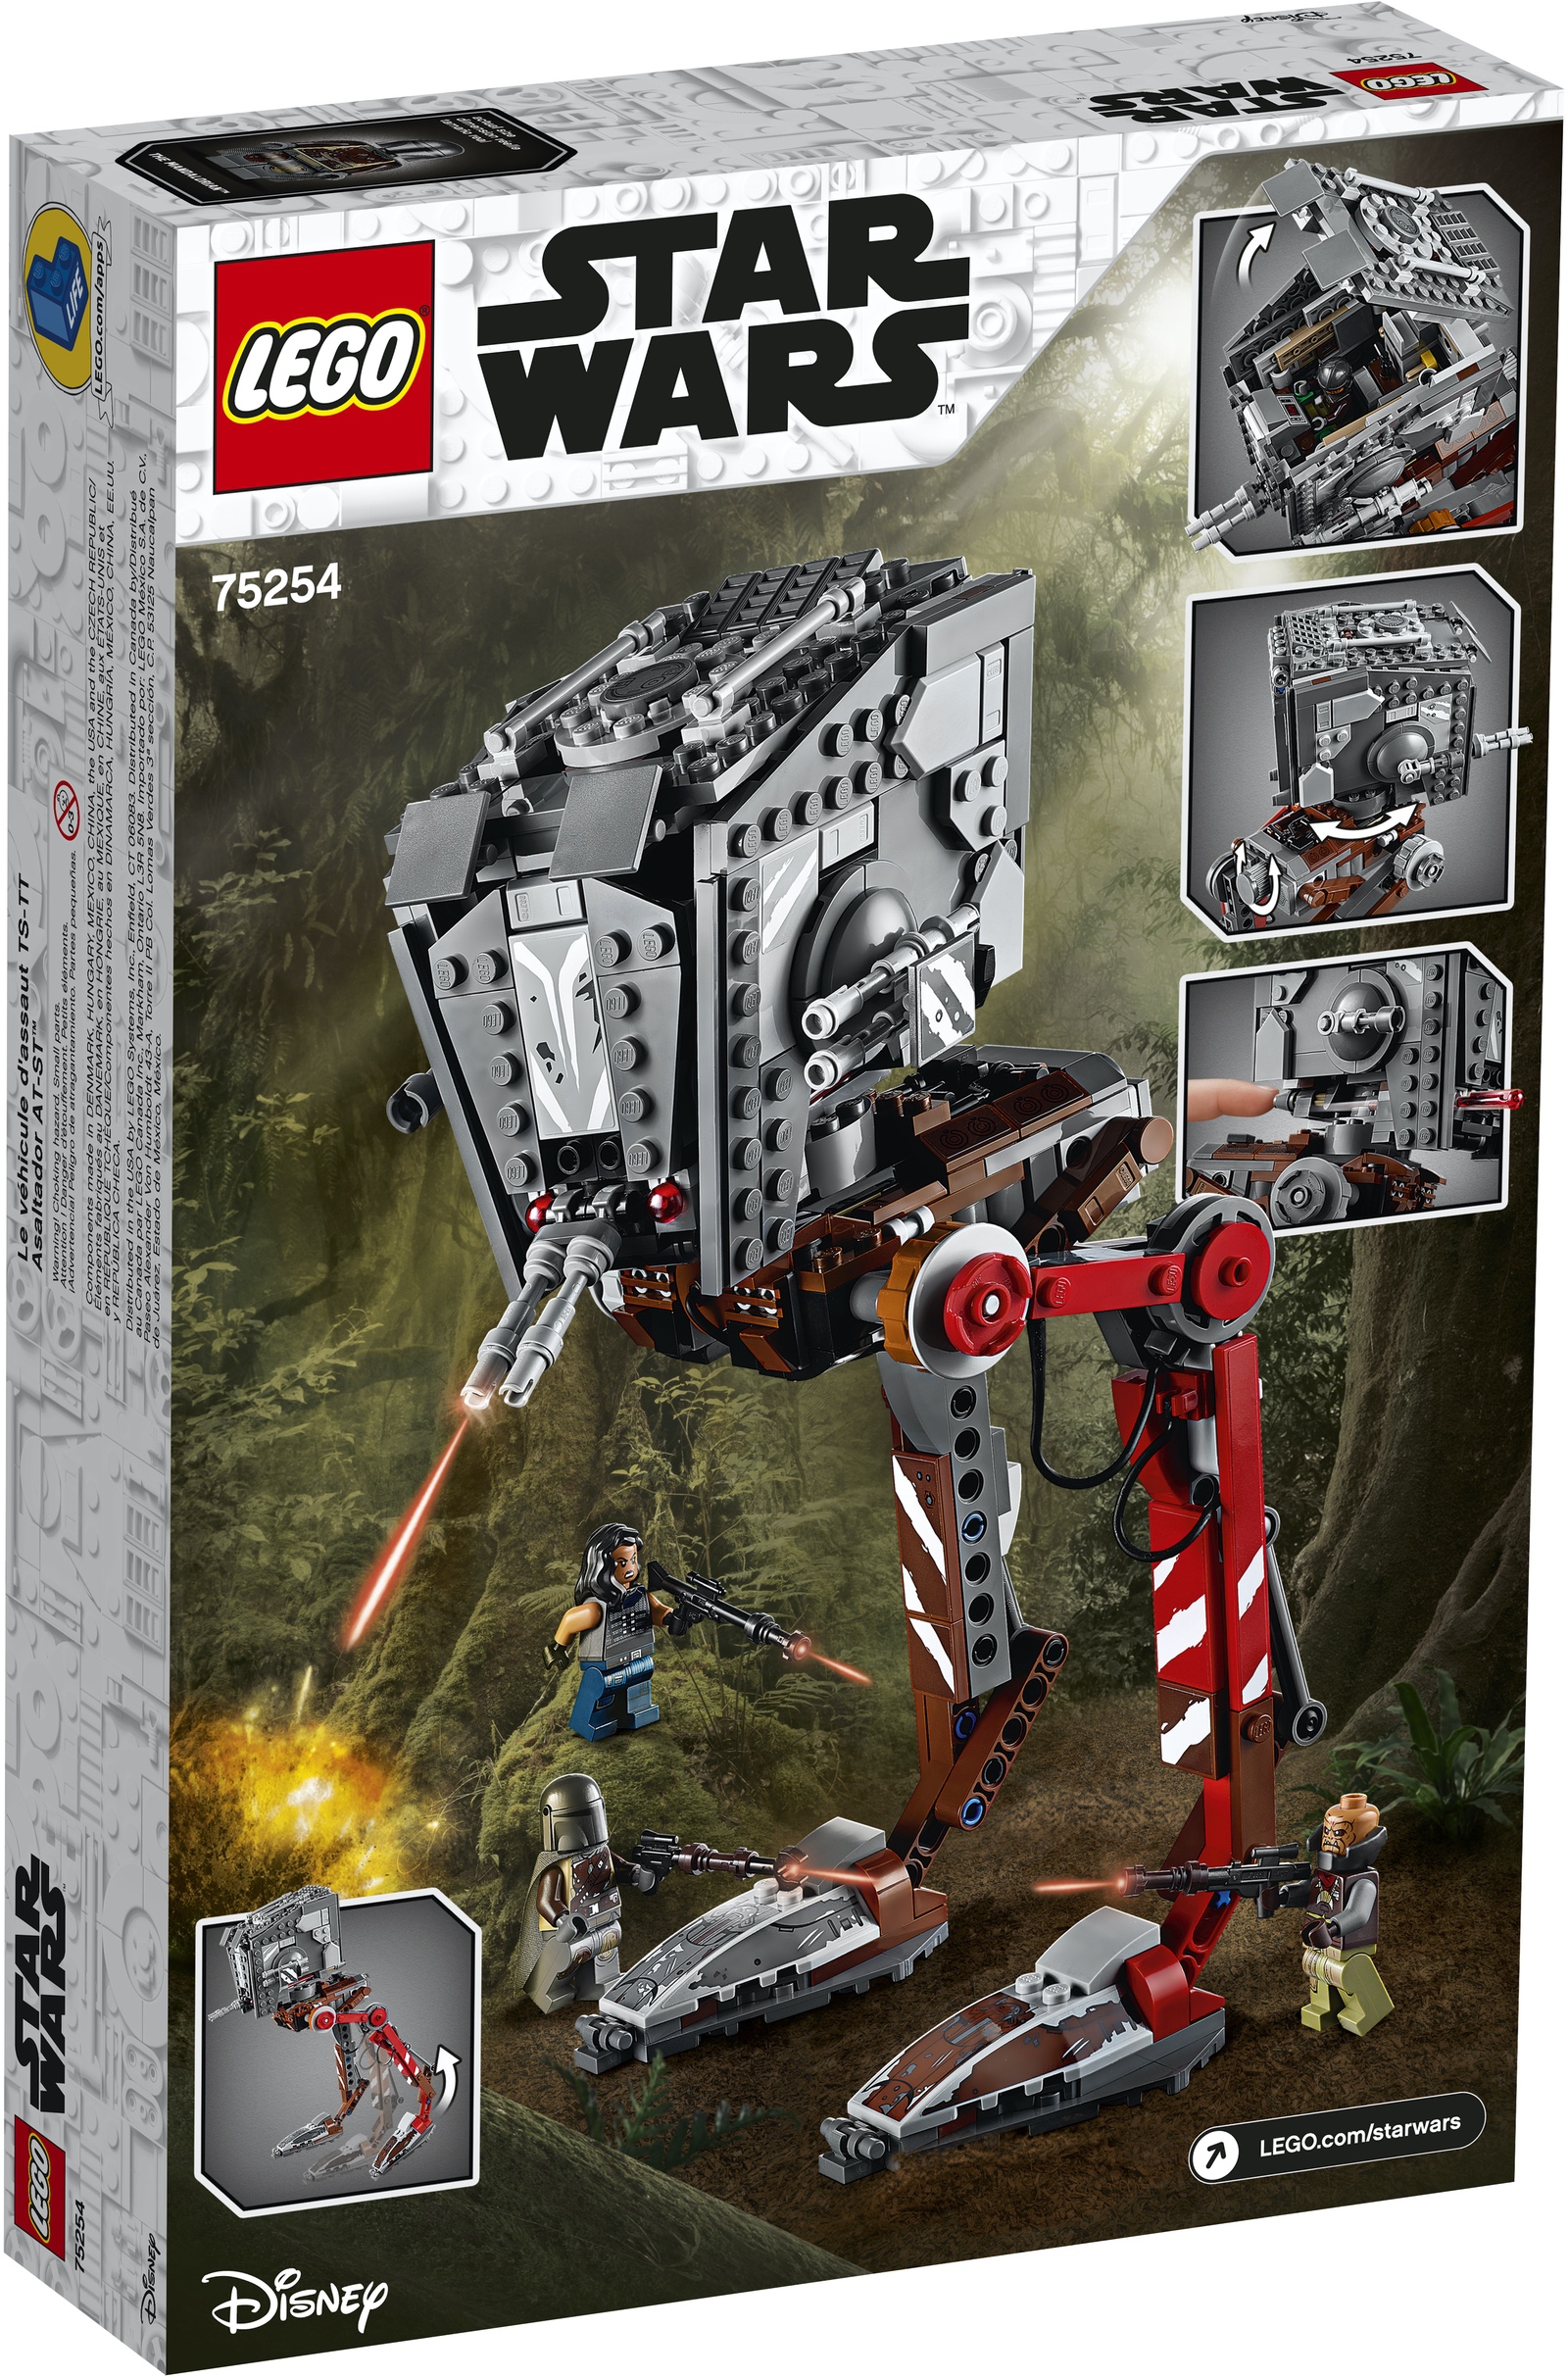 LEGO's new Star Wars: The Last Jedi sets released for Force Friday